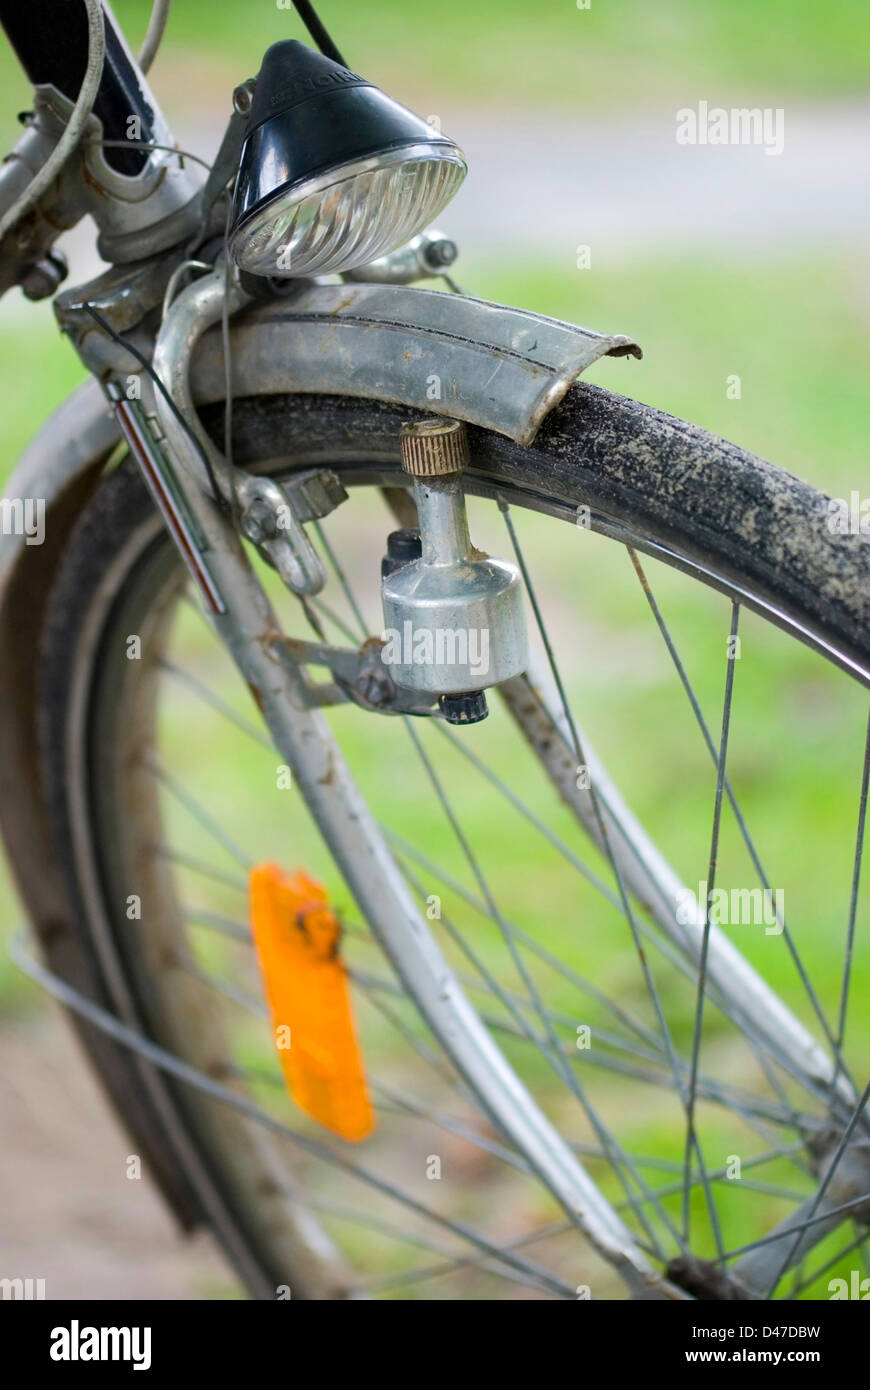 Close up of bicycle wheel with dynamo Stock Photo